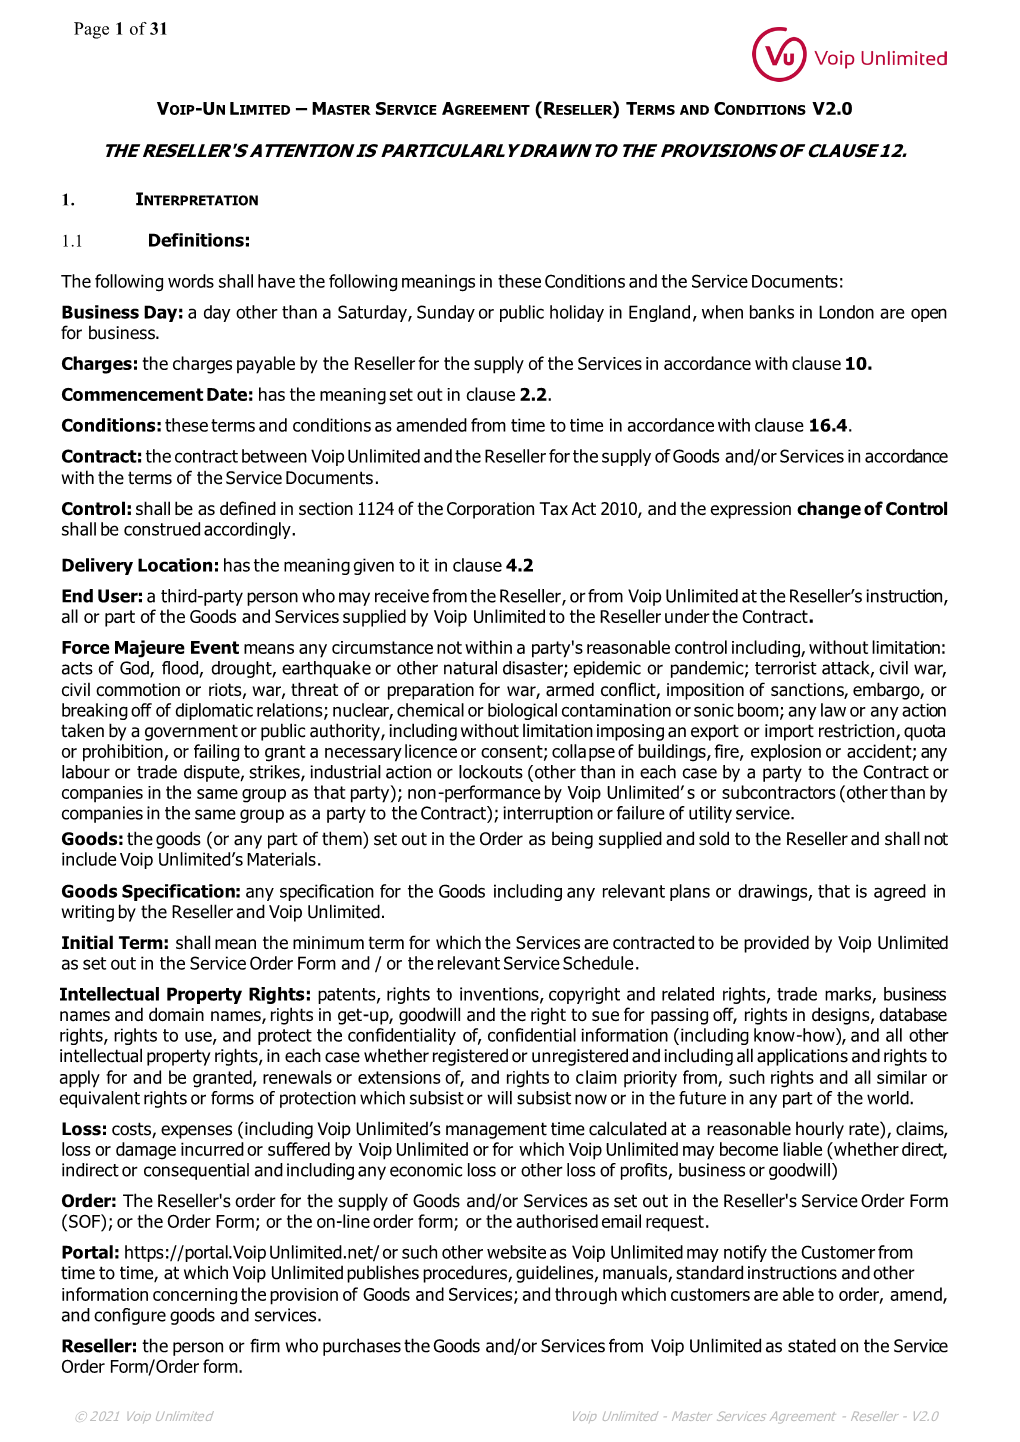 Master Services Agreement - Reseller - V2.0 Page 2 of 31